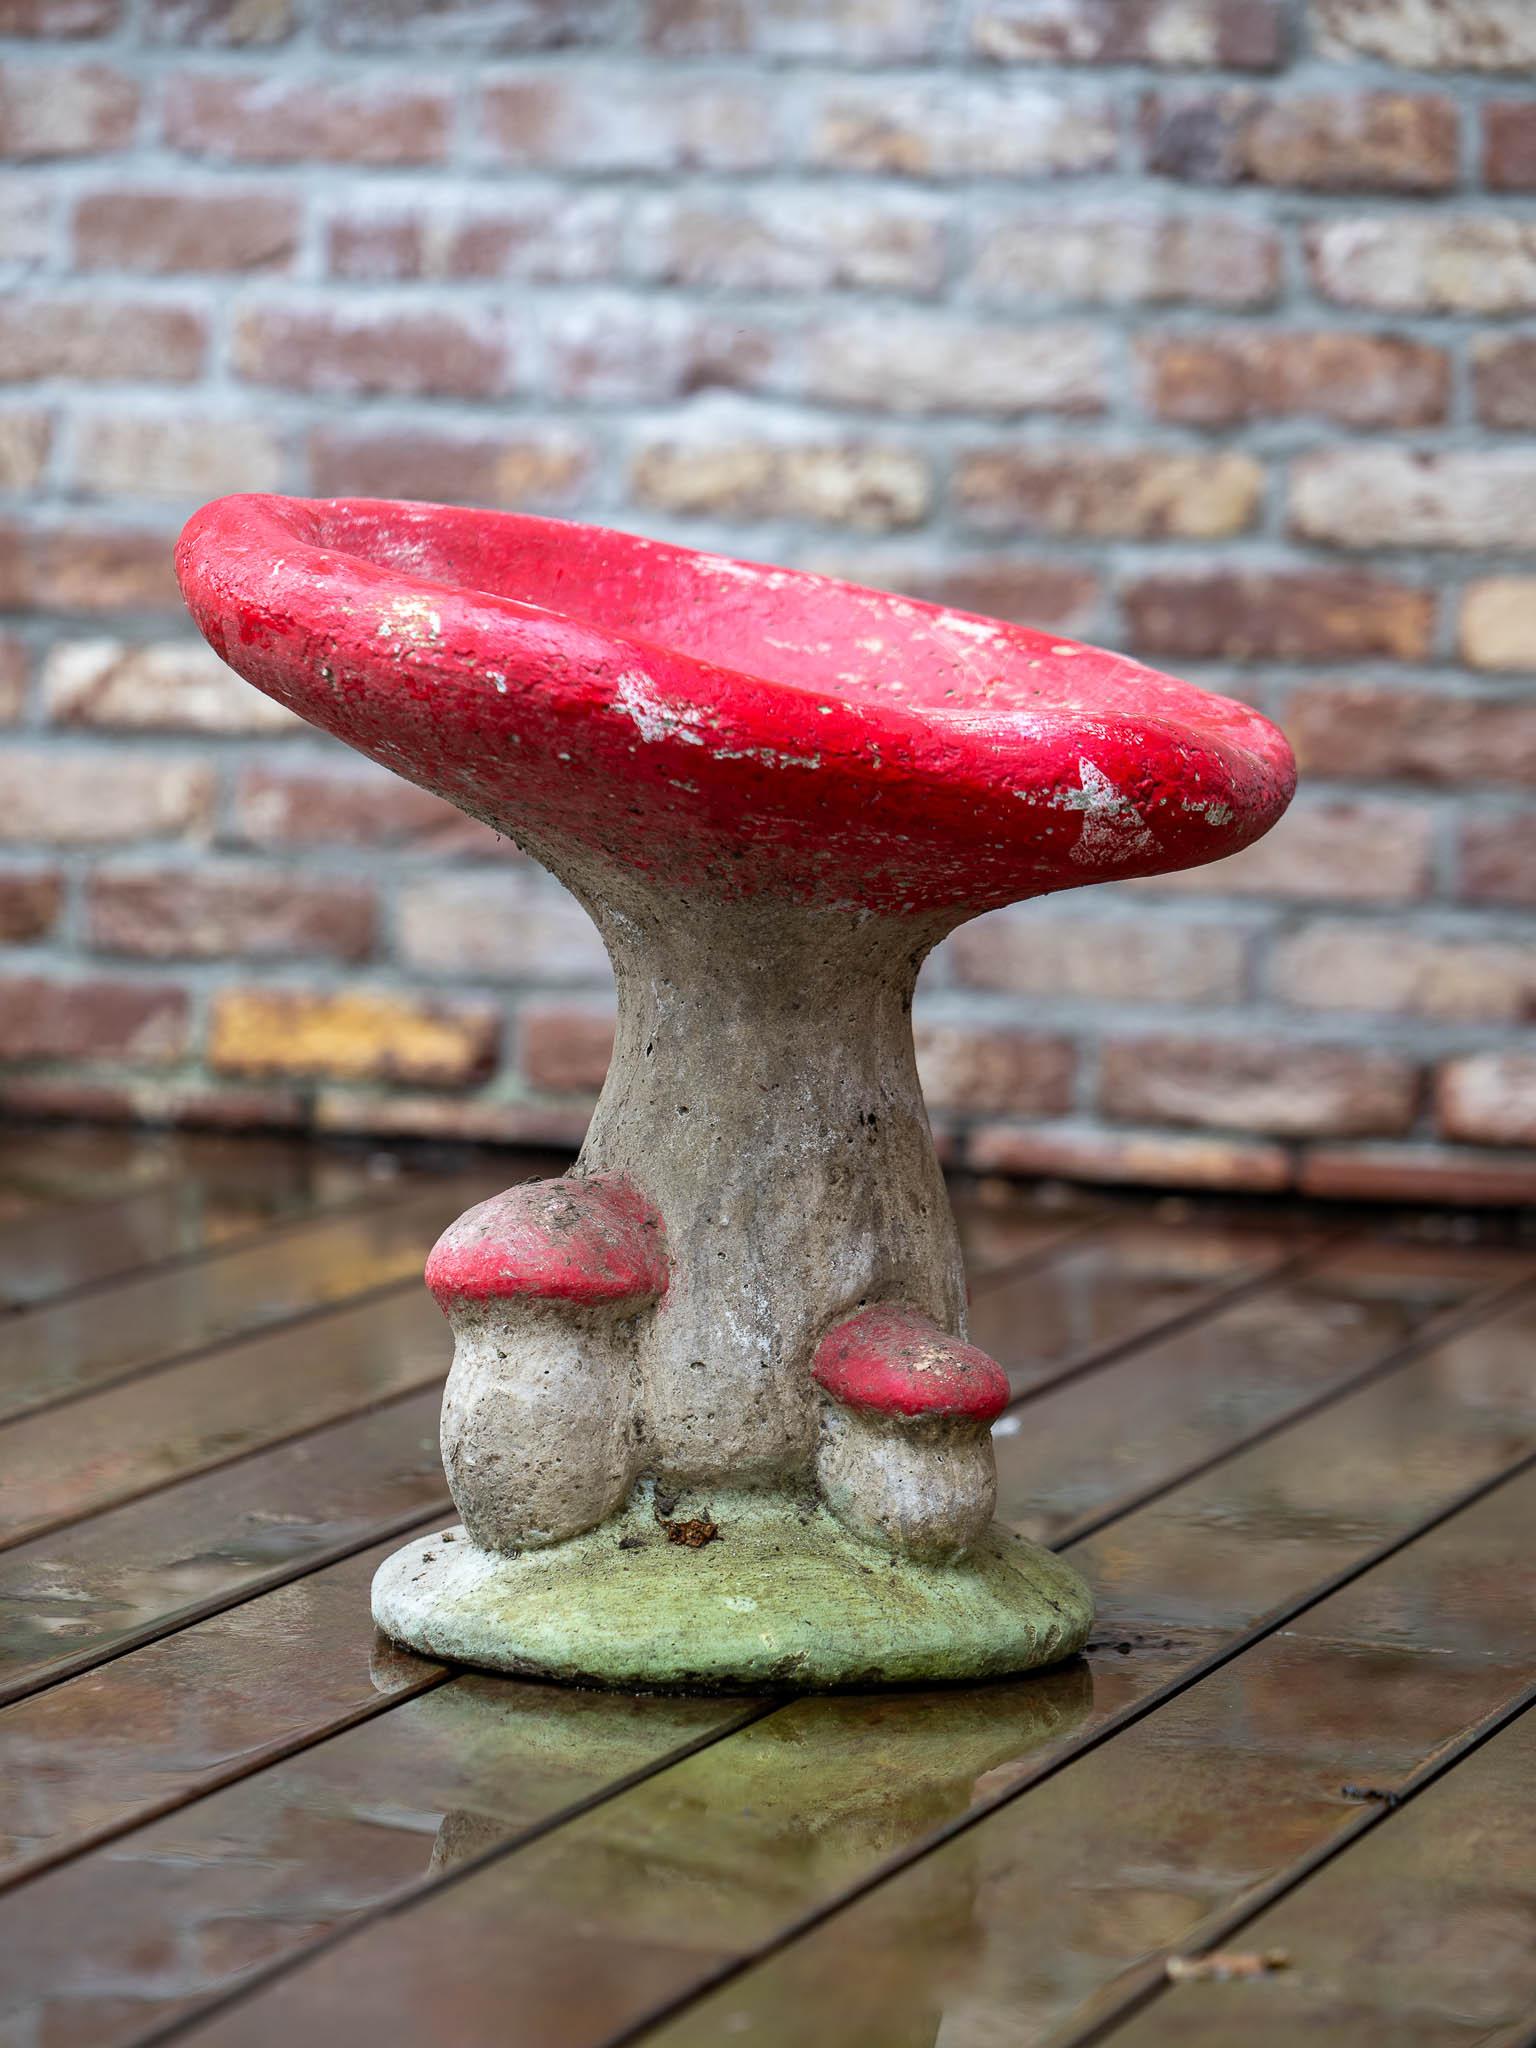 This pair of 1950s South West France red mushrooms seats are made of concrete, frost resistant and very sturdy. In addition, it is equipped with a continuous hole, which ensures the drainage. One mushroom weighs around 20 kilos, and will not just be